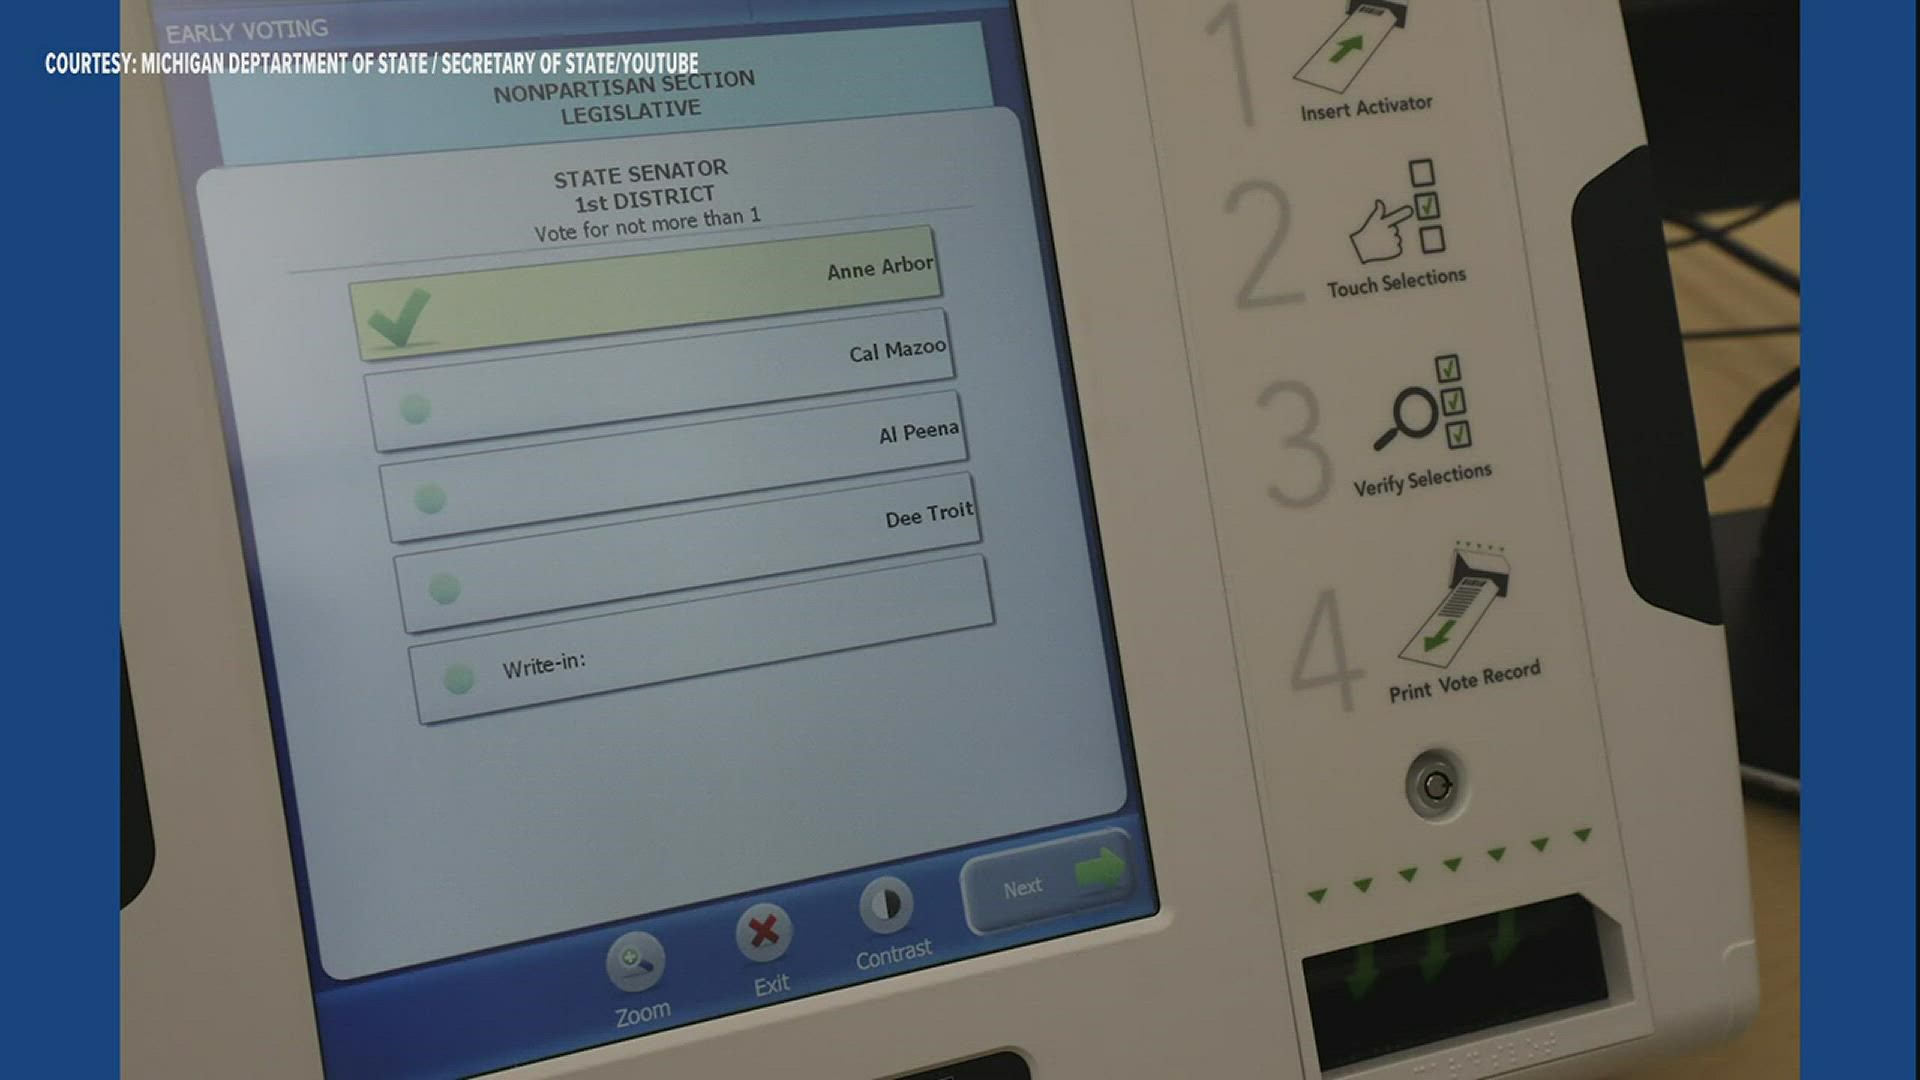 County commissioners approved the purchase of new auditable voting machines in February.